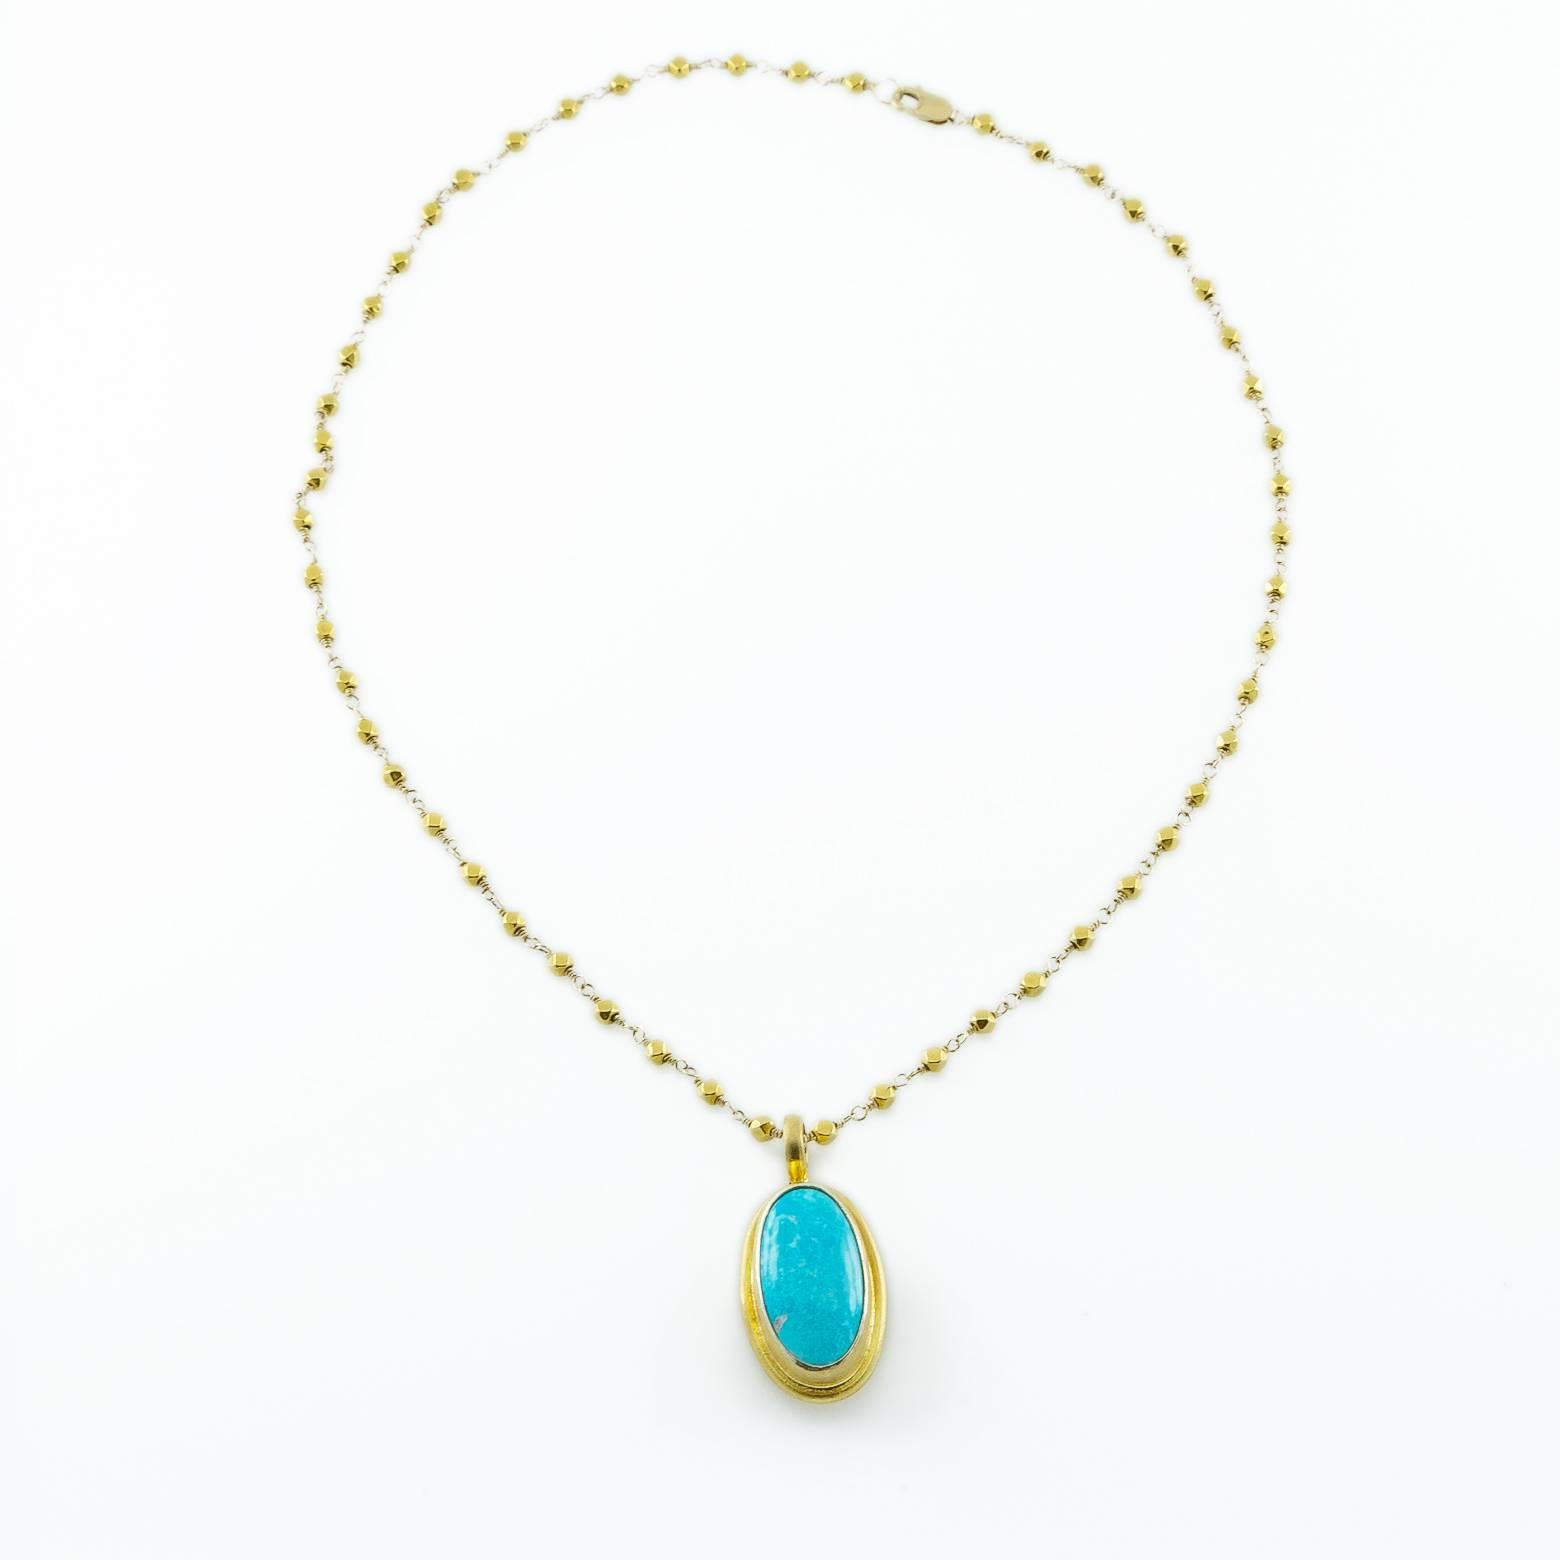 This beautiful turquoise pendant has a stunning satin finish and the depth and style to it absolutely mesmerizing. It's a  cloud-like cushion sky blue and is dreamy with over a quarter of an inch of depth. 